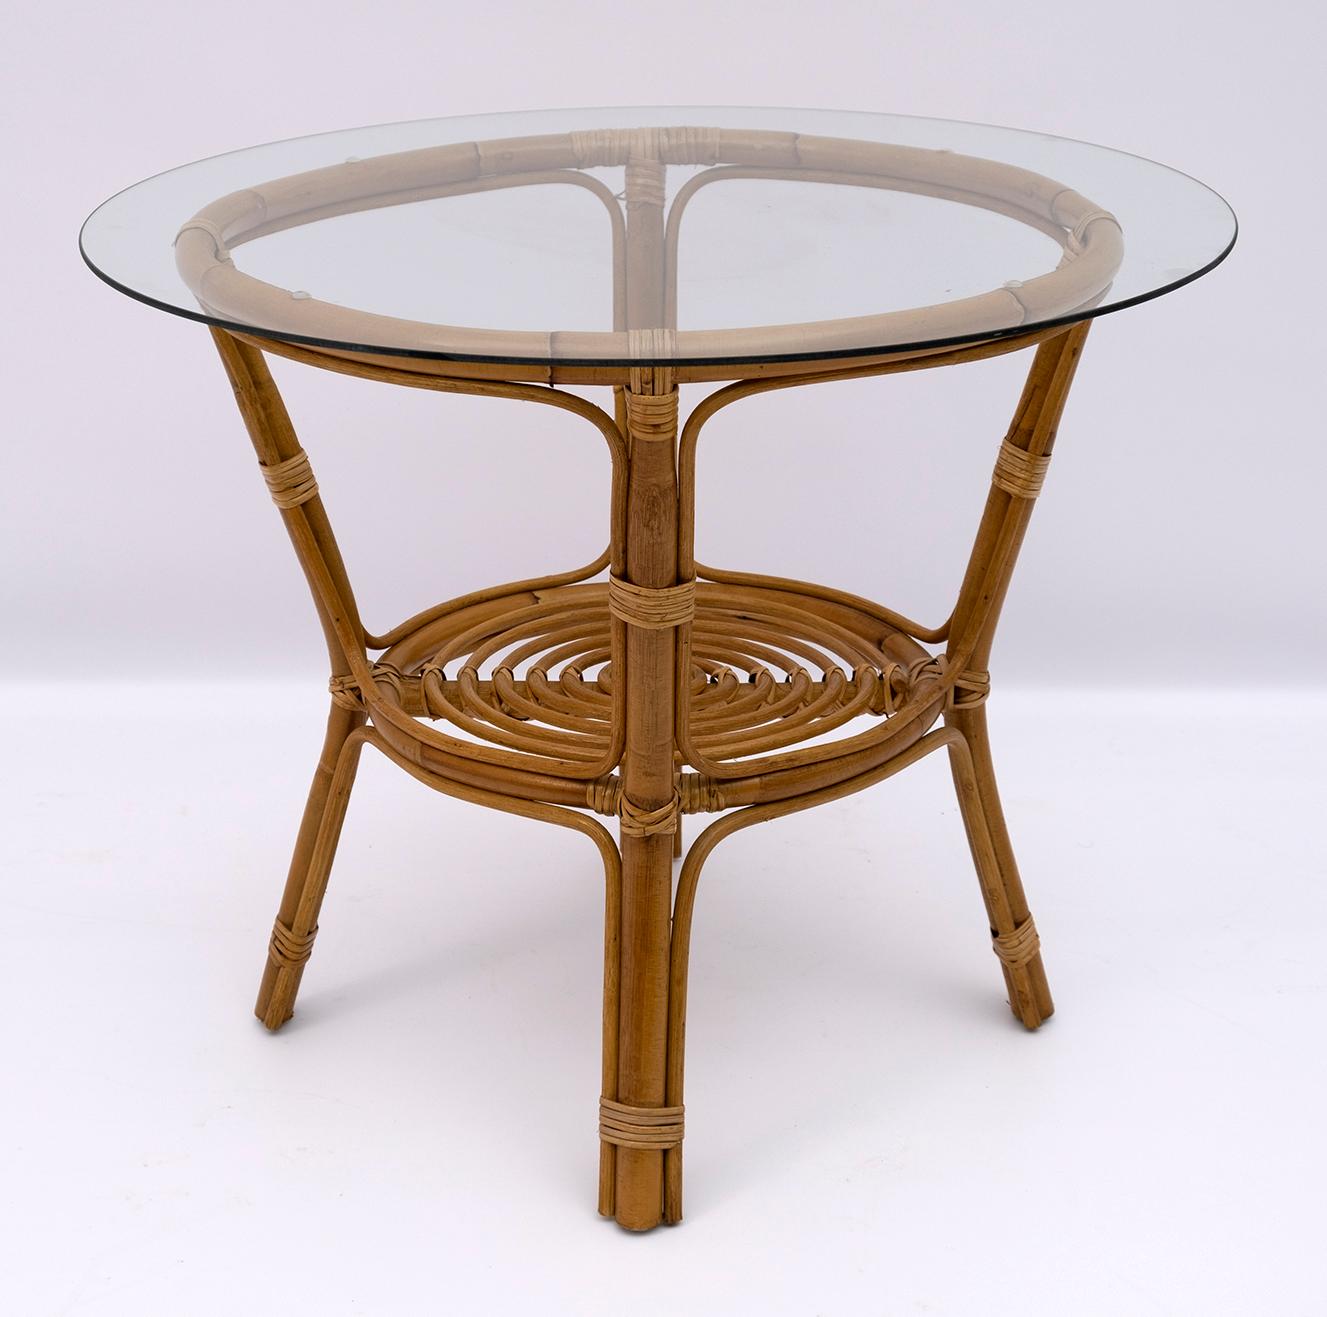 This hand-bent bamboo and wicker coffee table is an Italian production of the 1950s.